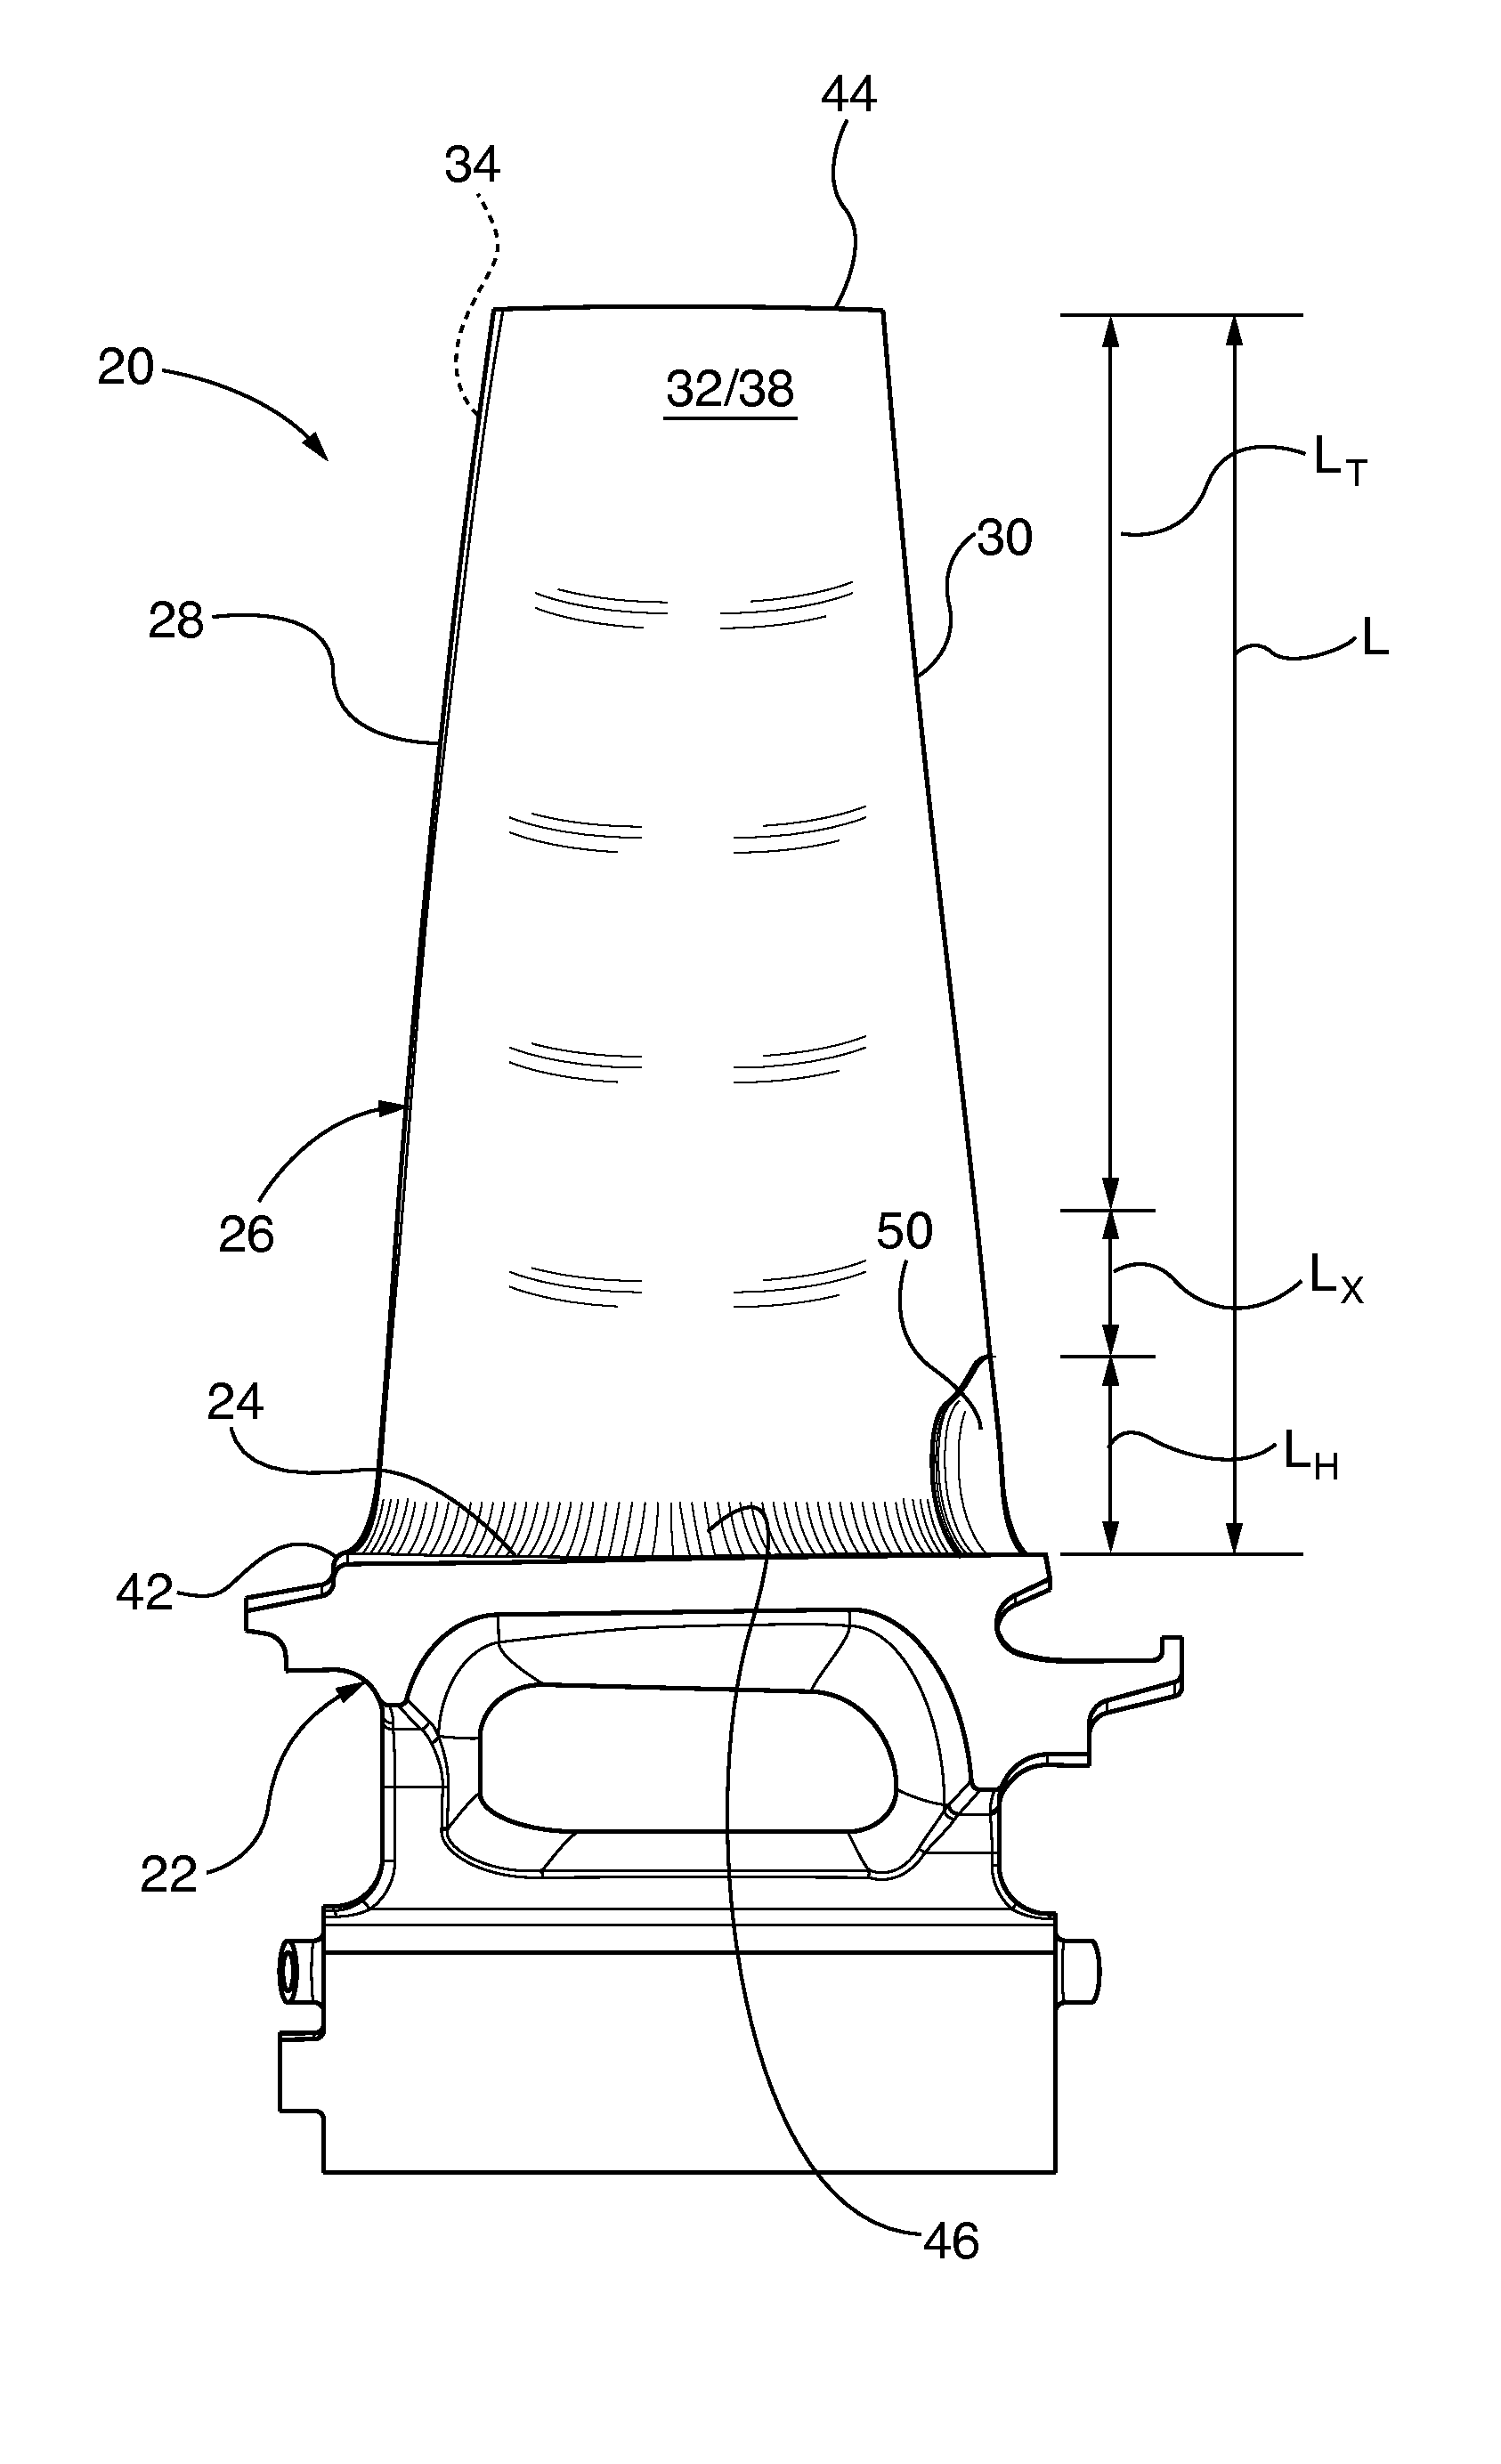 Gas turbine engine blade with increased wall thickness zone in the trailing edge-hub region